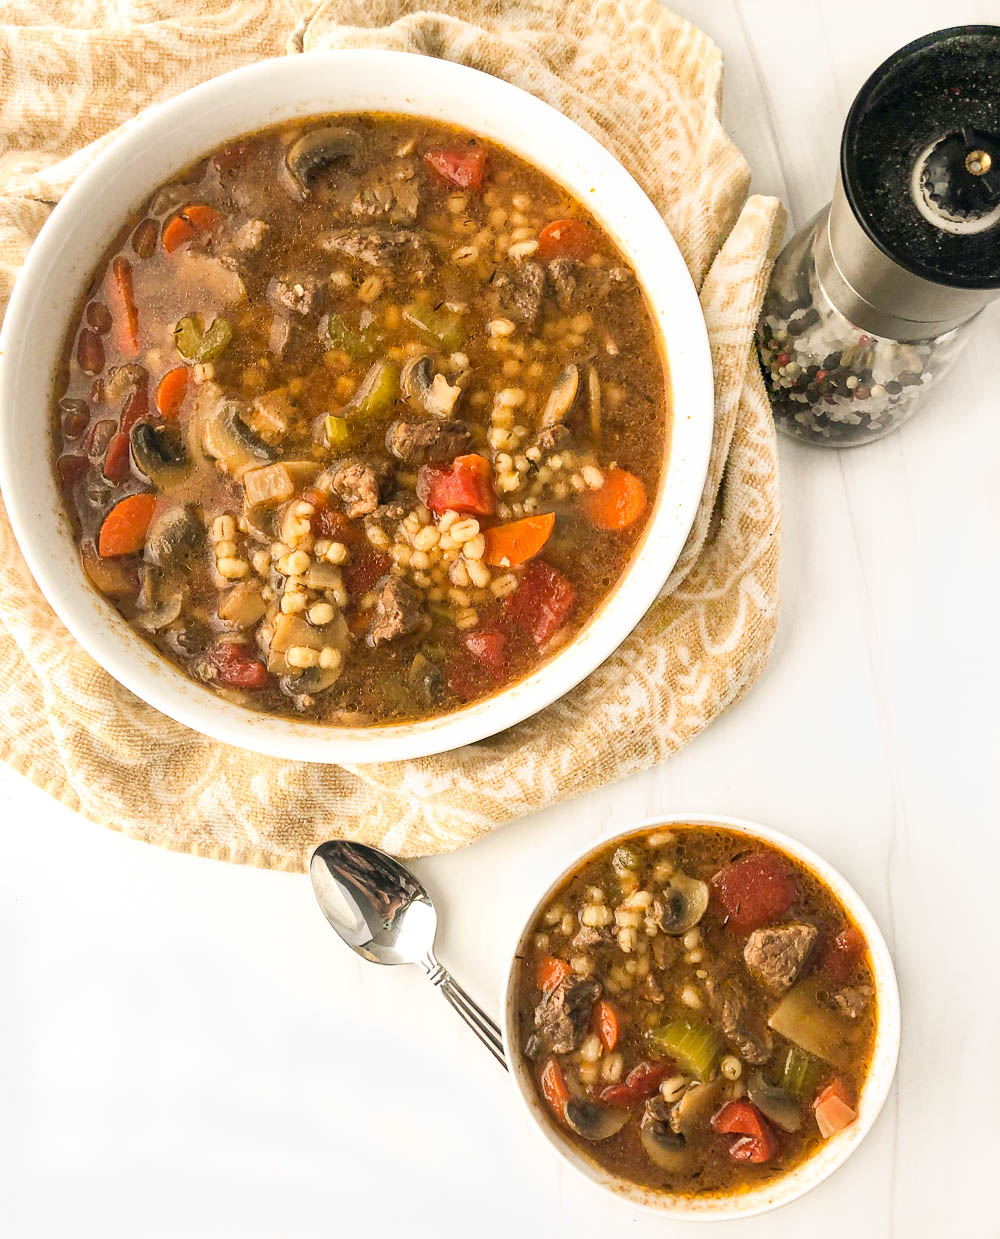 Traditional Beef and Barley Soup Recipe - Chef Billy Parisi